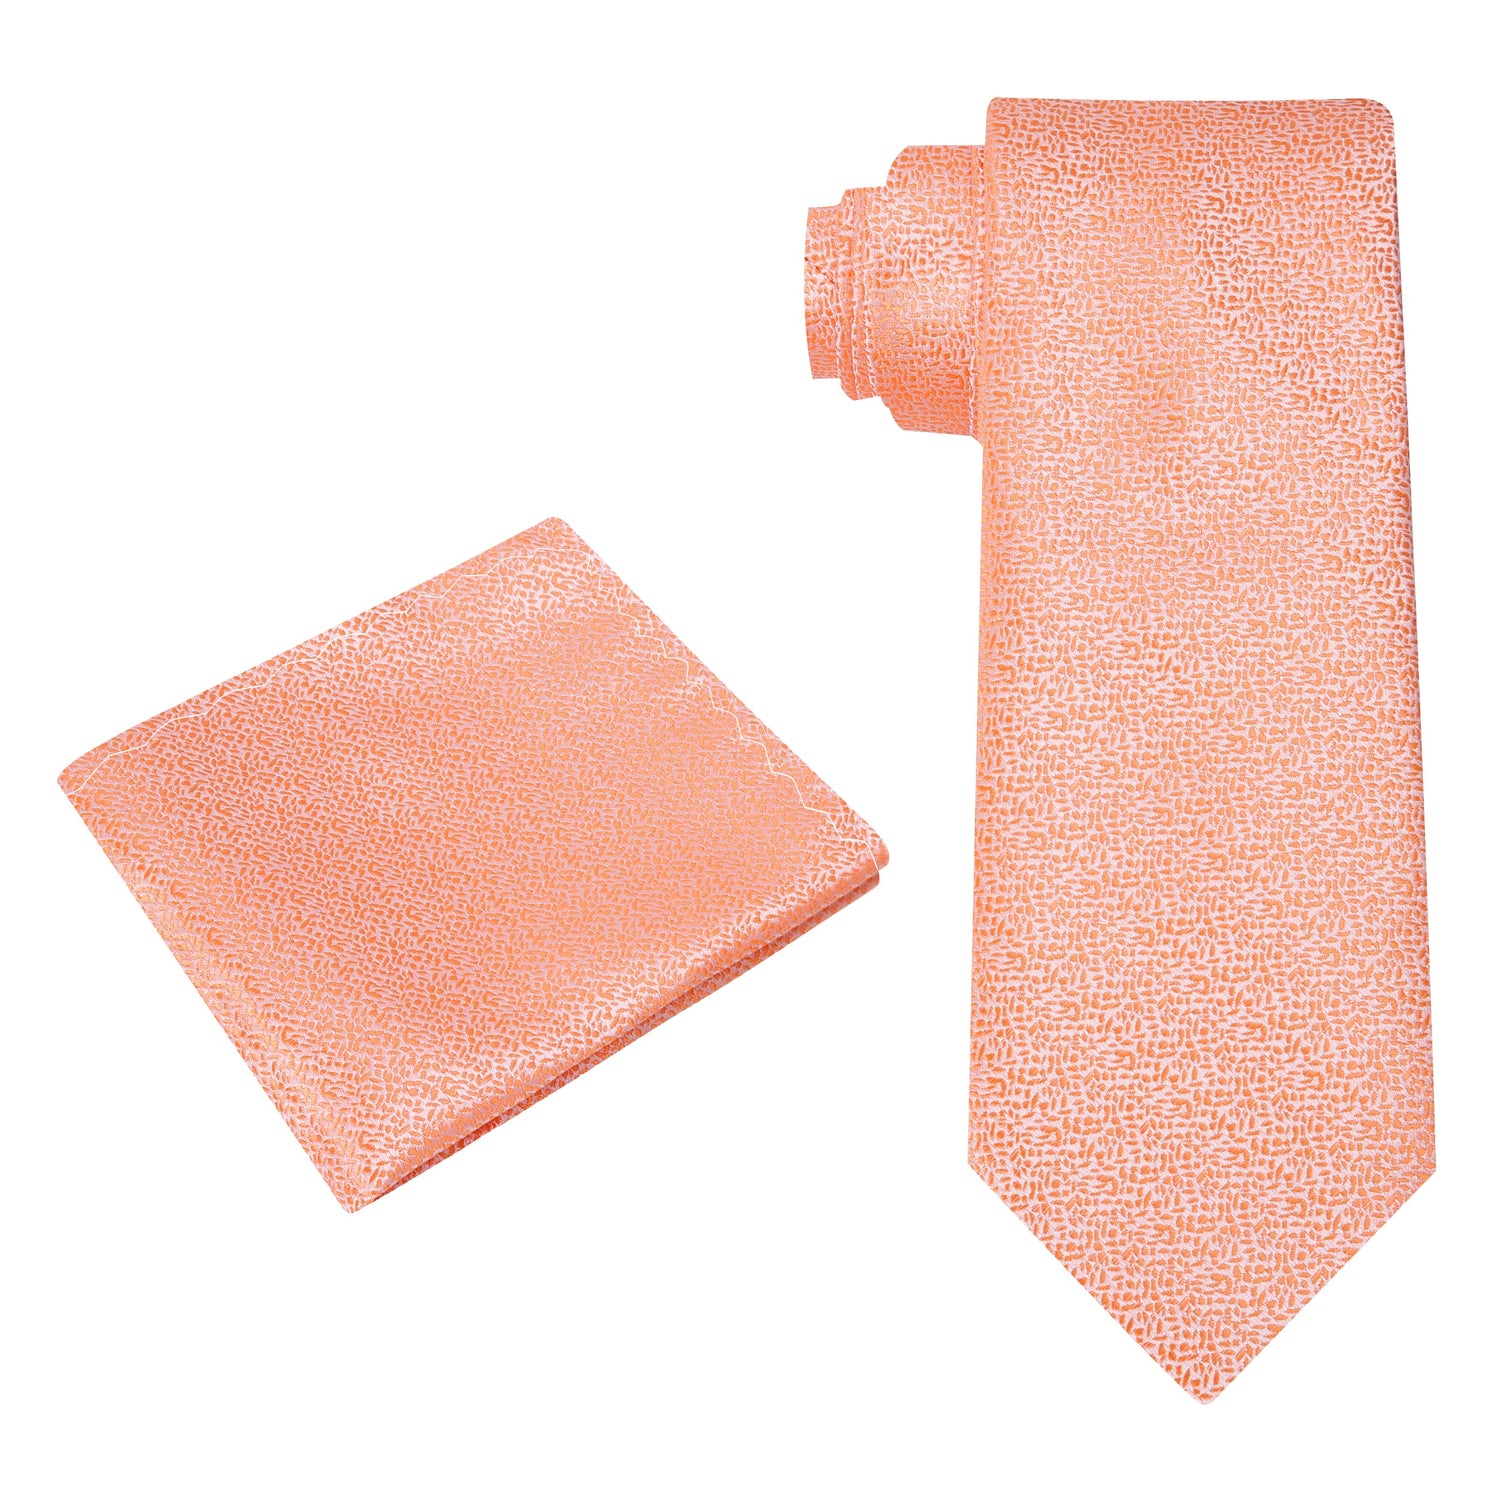 Alt View: A Solid Coral Shimmer Pattern Silk Necktie, Matching Pocket Square